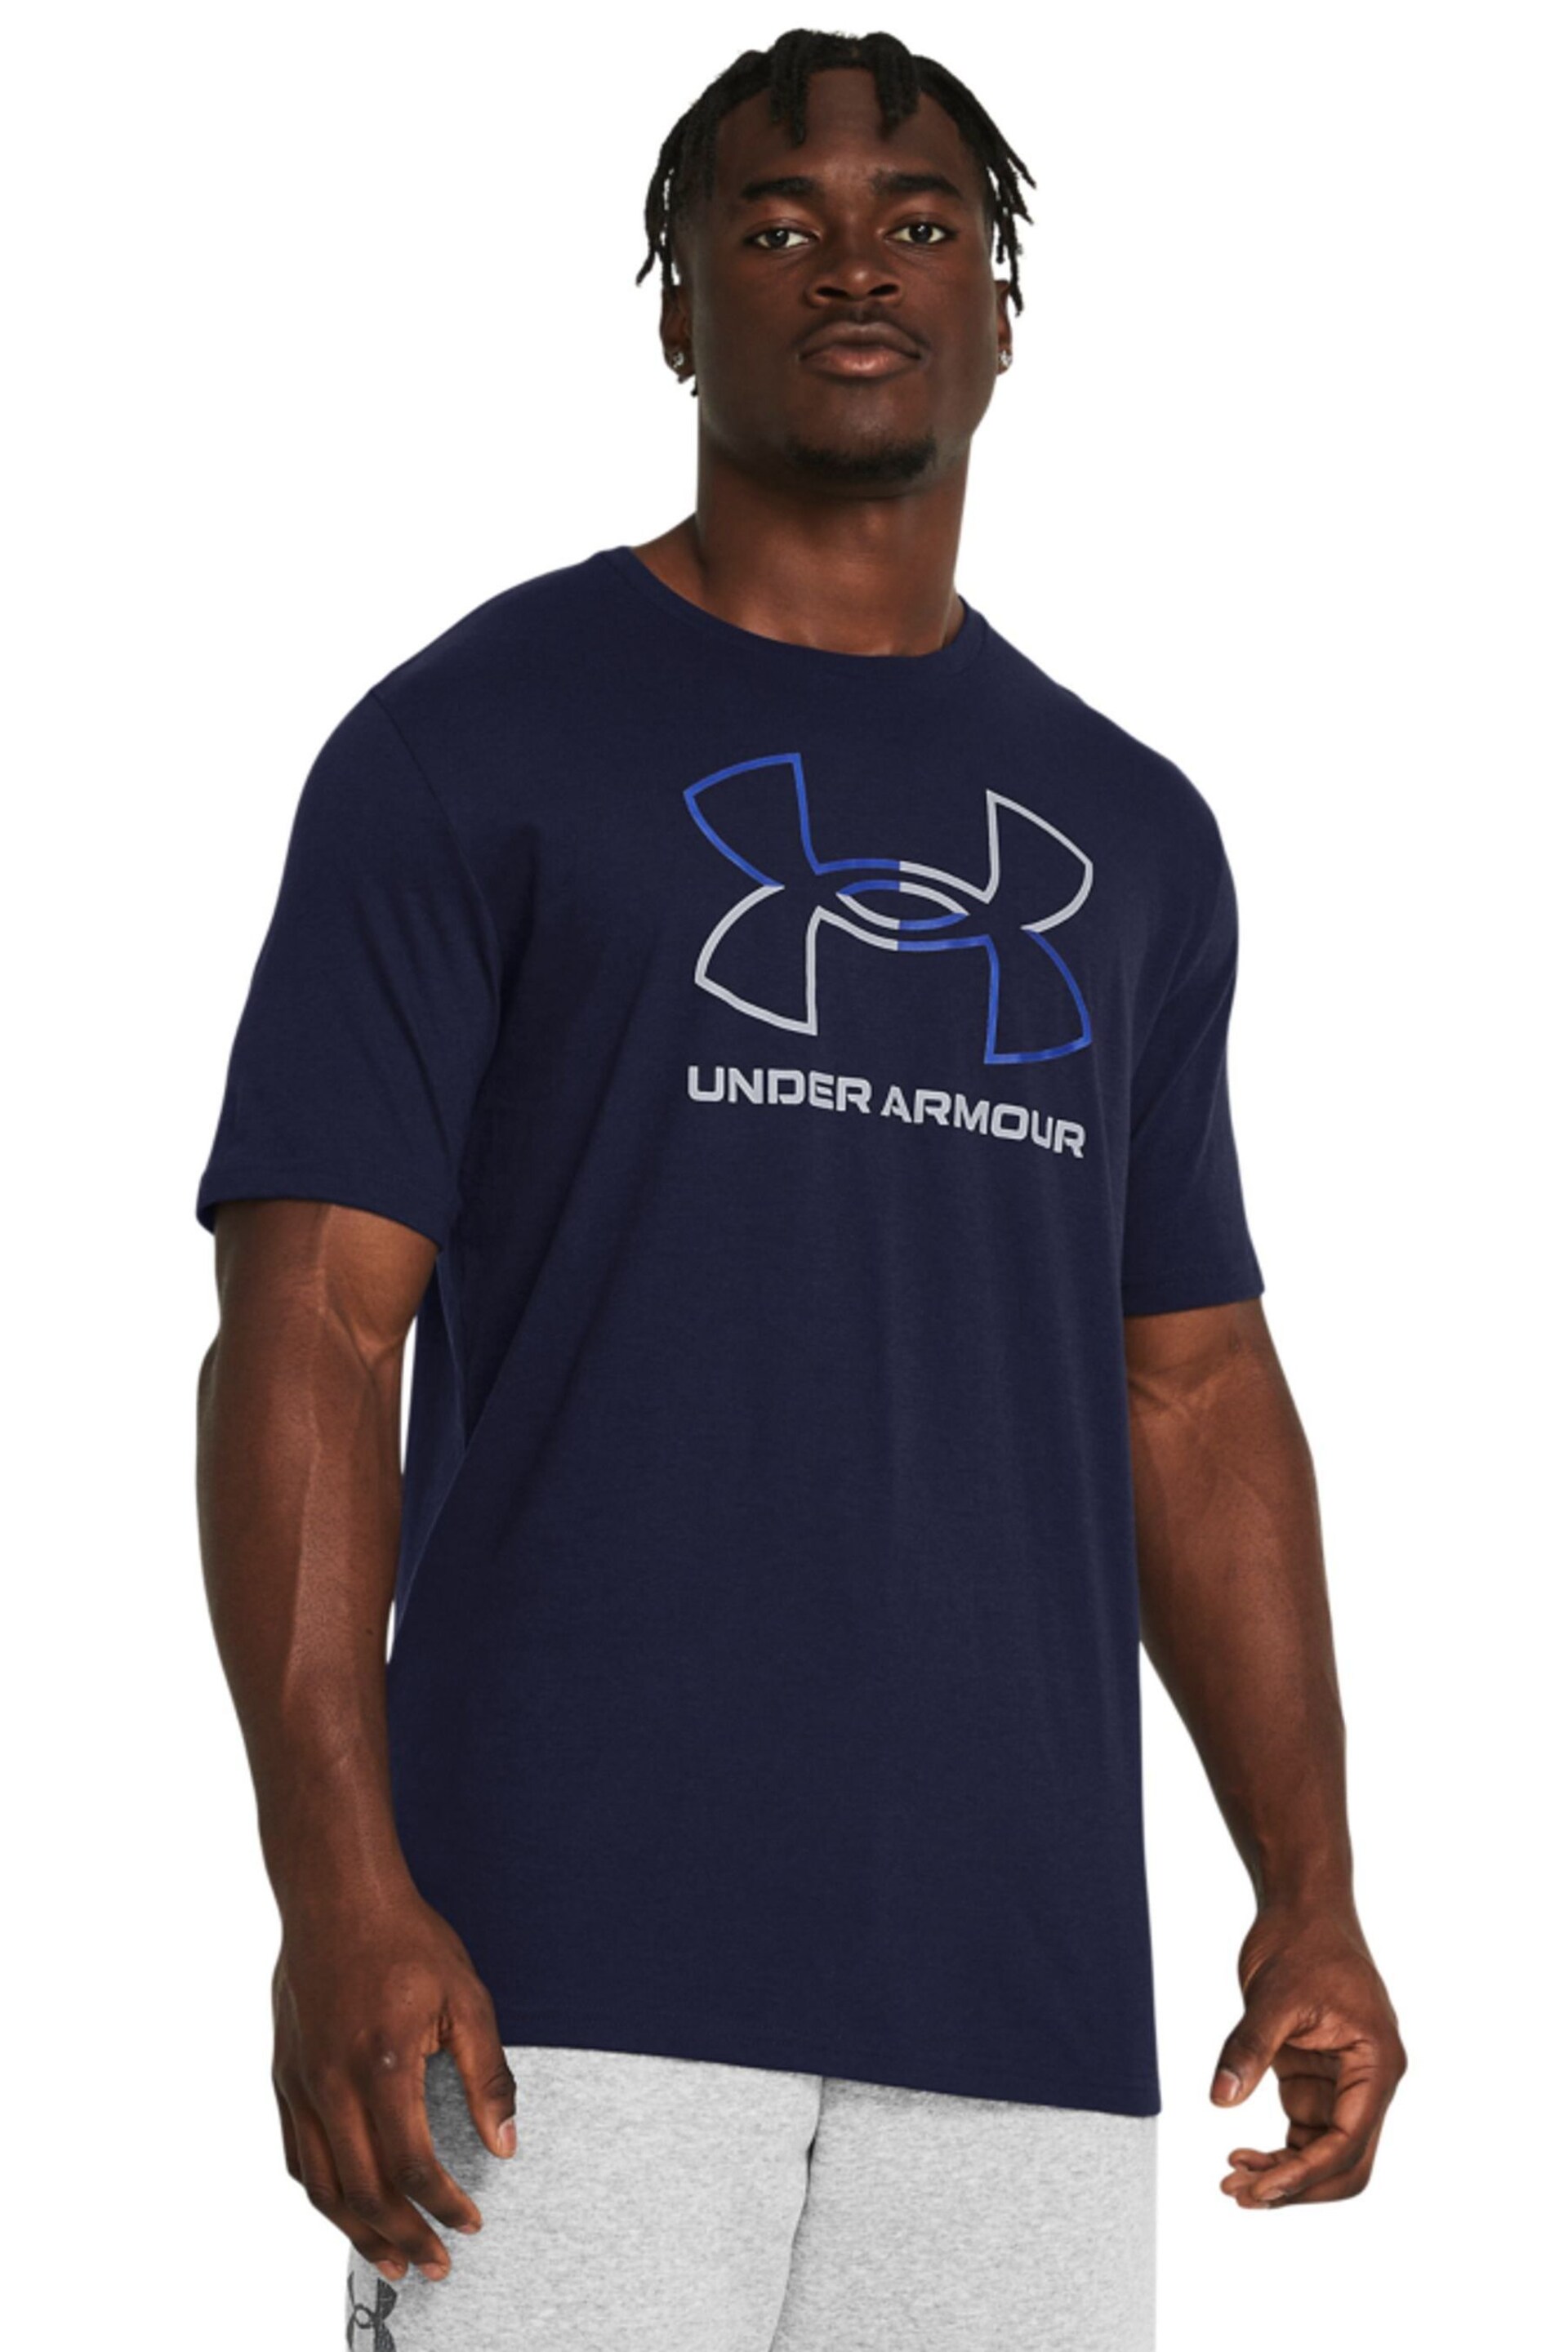 Under Armour Navy Blue Foundation Short Sleeve T-Shirt - Image 1 of 4